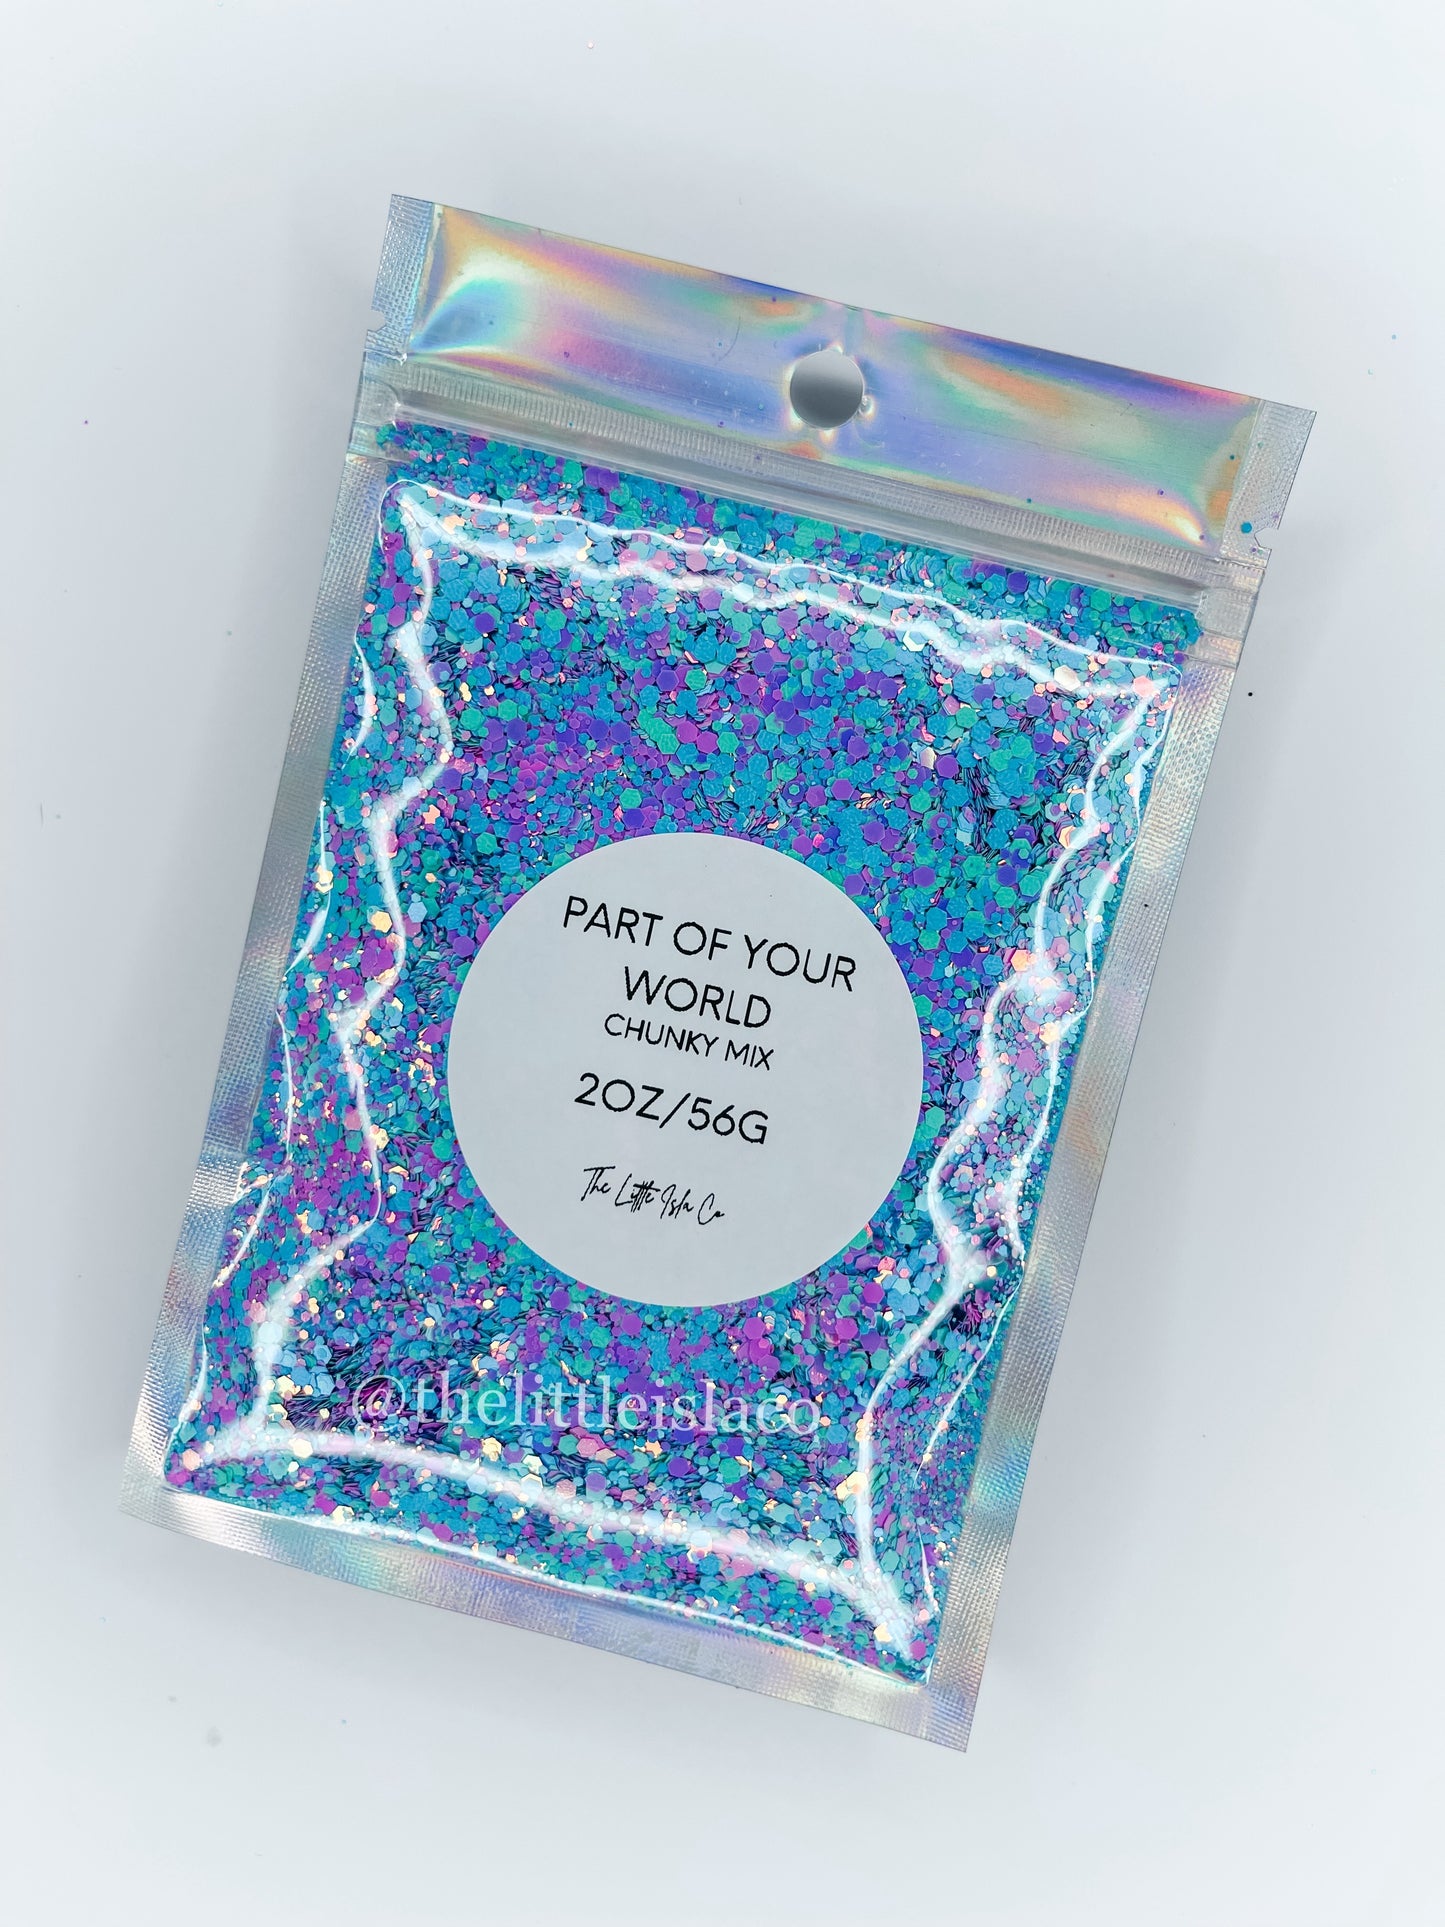 Chunky Glitter Mix - ‘Part of Your World’ - 2oz/56g Pack